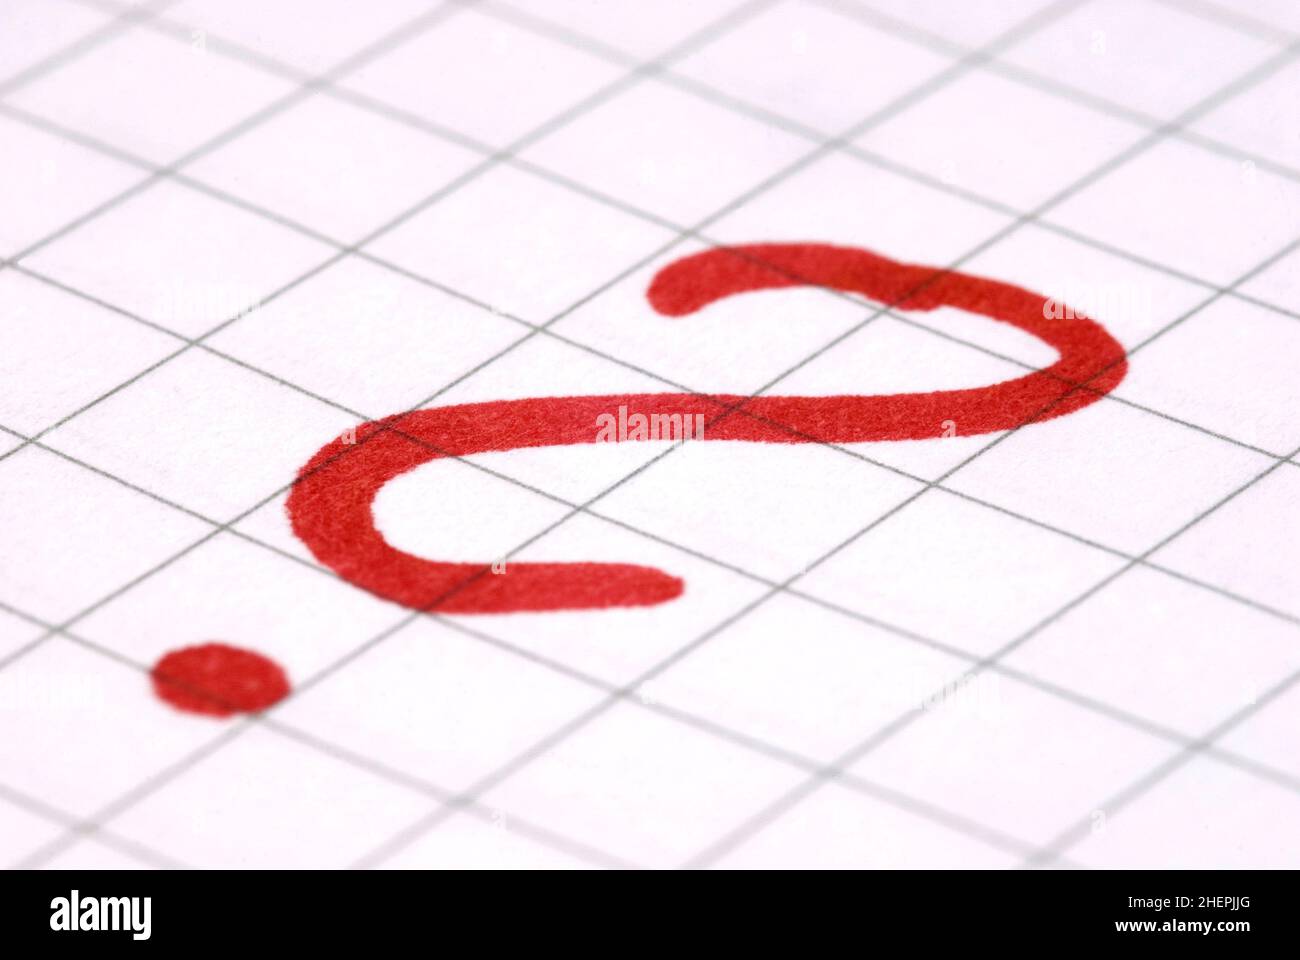 red question mark on a paper sheet Stock Photo